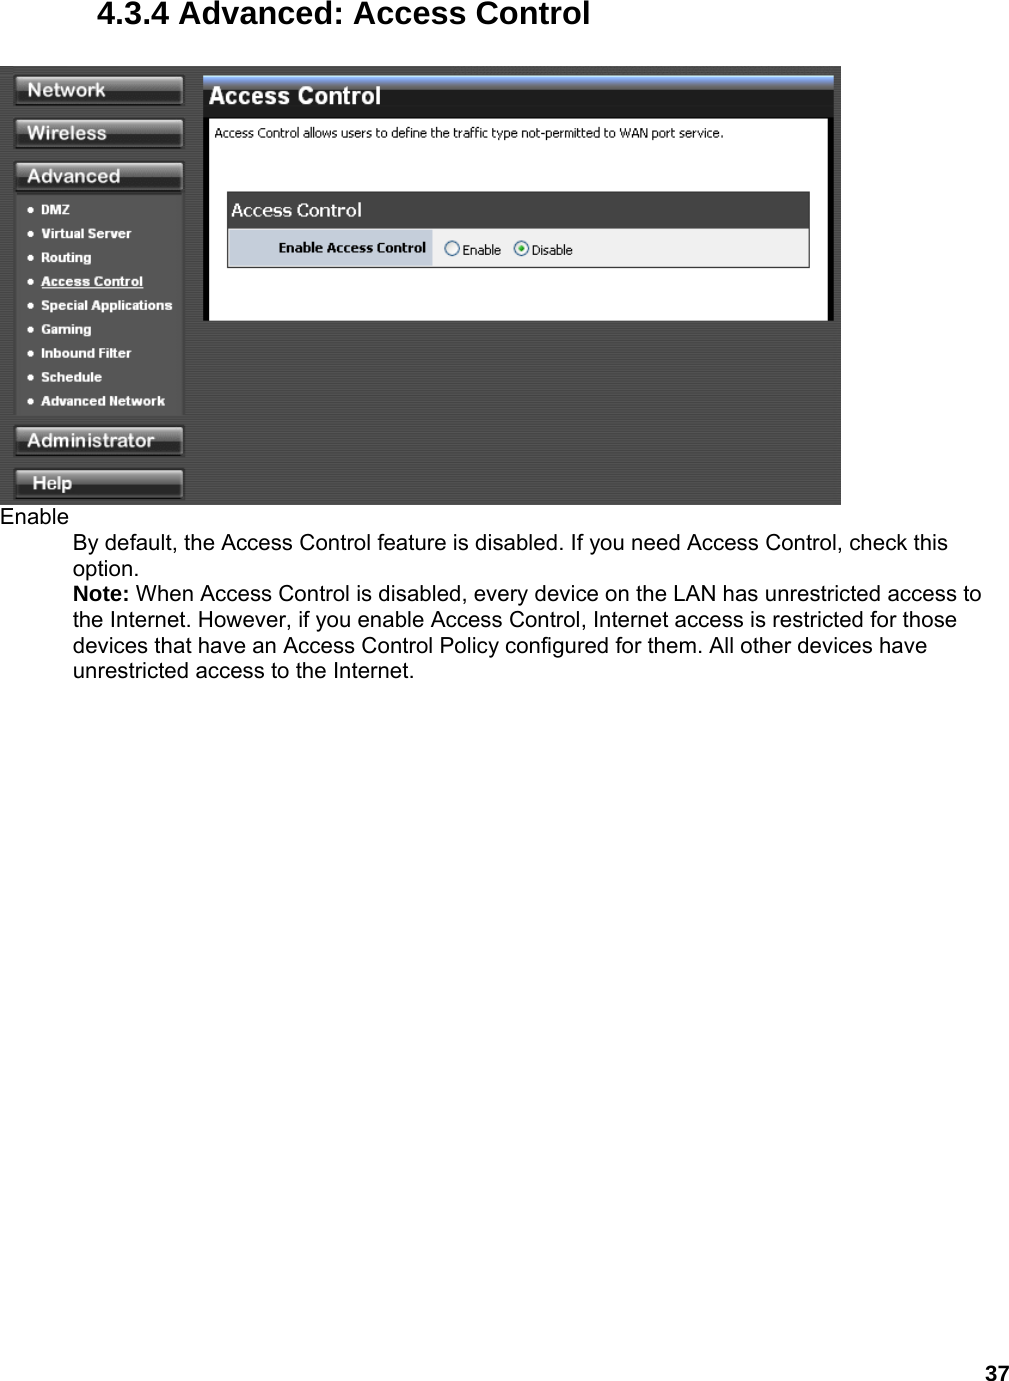 37 4.3.4 Advanced: Access Control   Enable  By default, the Access Control feature is disabled. If you need Access Control, check this option.  Note: When Access Control is disabled, every device on the LAN has unrestricted access to the Internet. However, if you enable Access Control, Internet access is restricted for those devices that have an Access Control Policy configured for them. All other devices have unrestricted access to the Internet.    